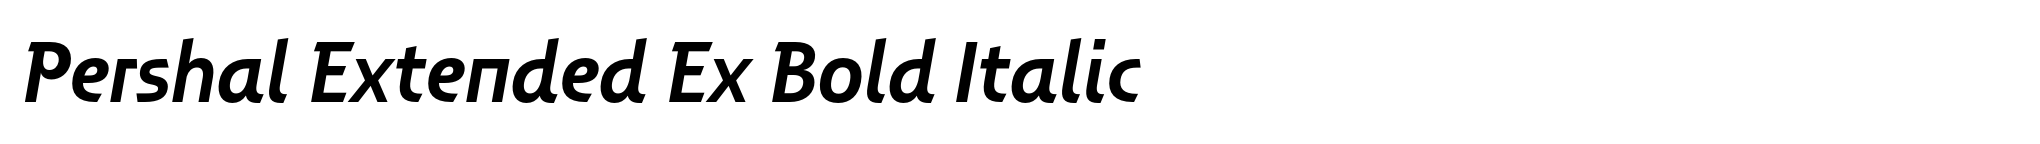 Pershal Extended Ex Bold Italic image